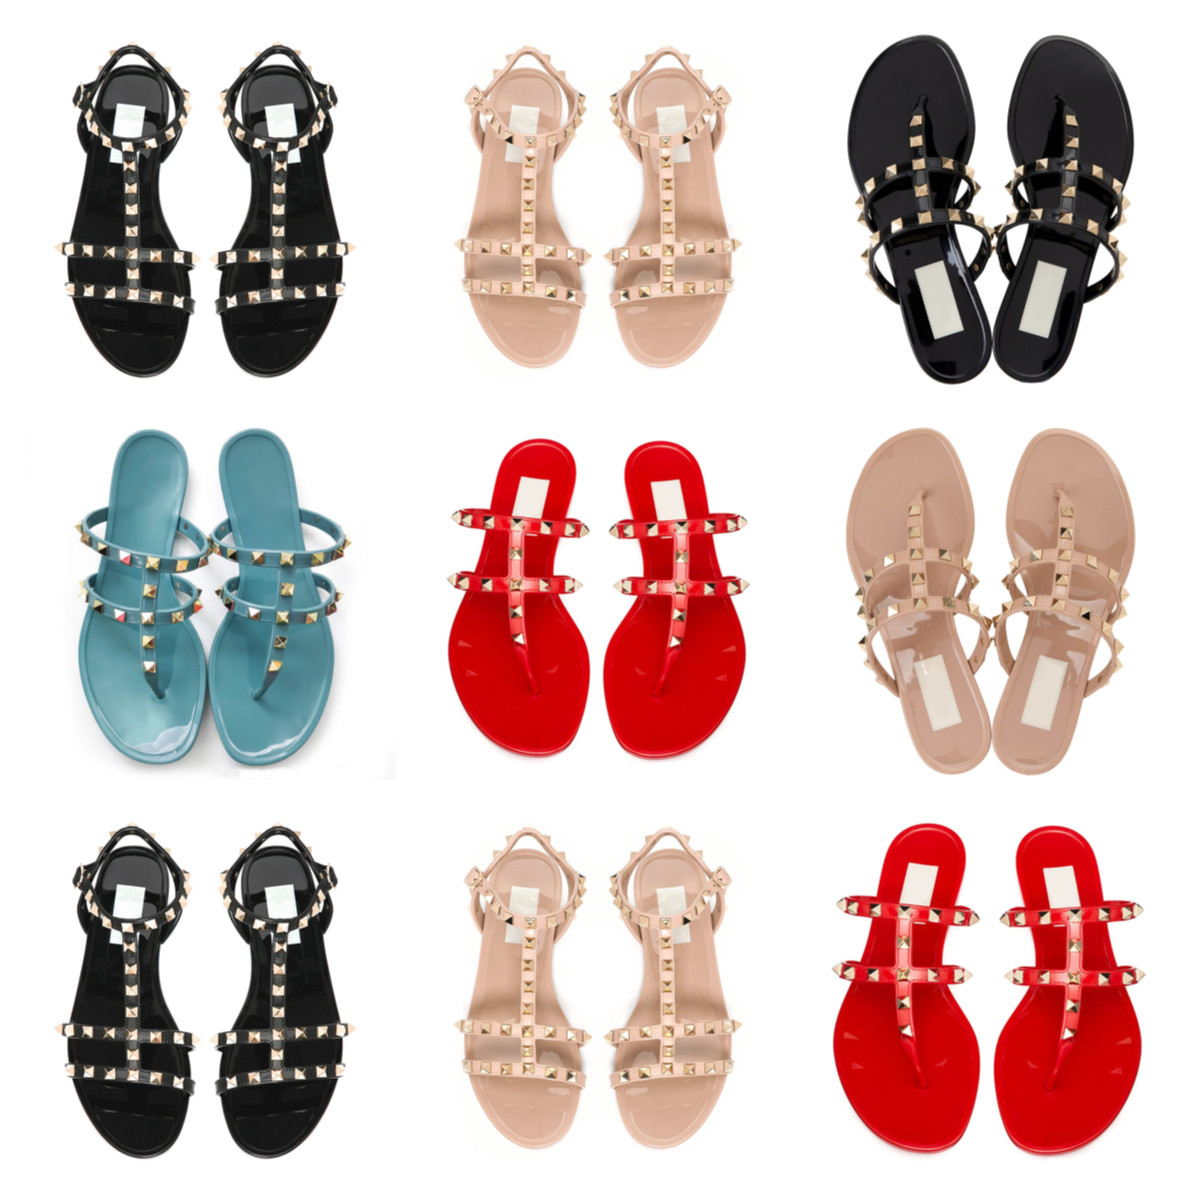 

Brands Fashion Women Rivets slipper ladies Flat jelly candy color Slippers thong sandals Girls Flip Flops studded Summer Shoes Cool Beach Slides Shoes 35-40, Do not choose;other color;contact me